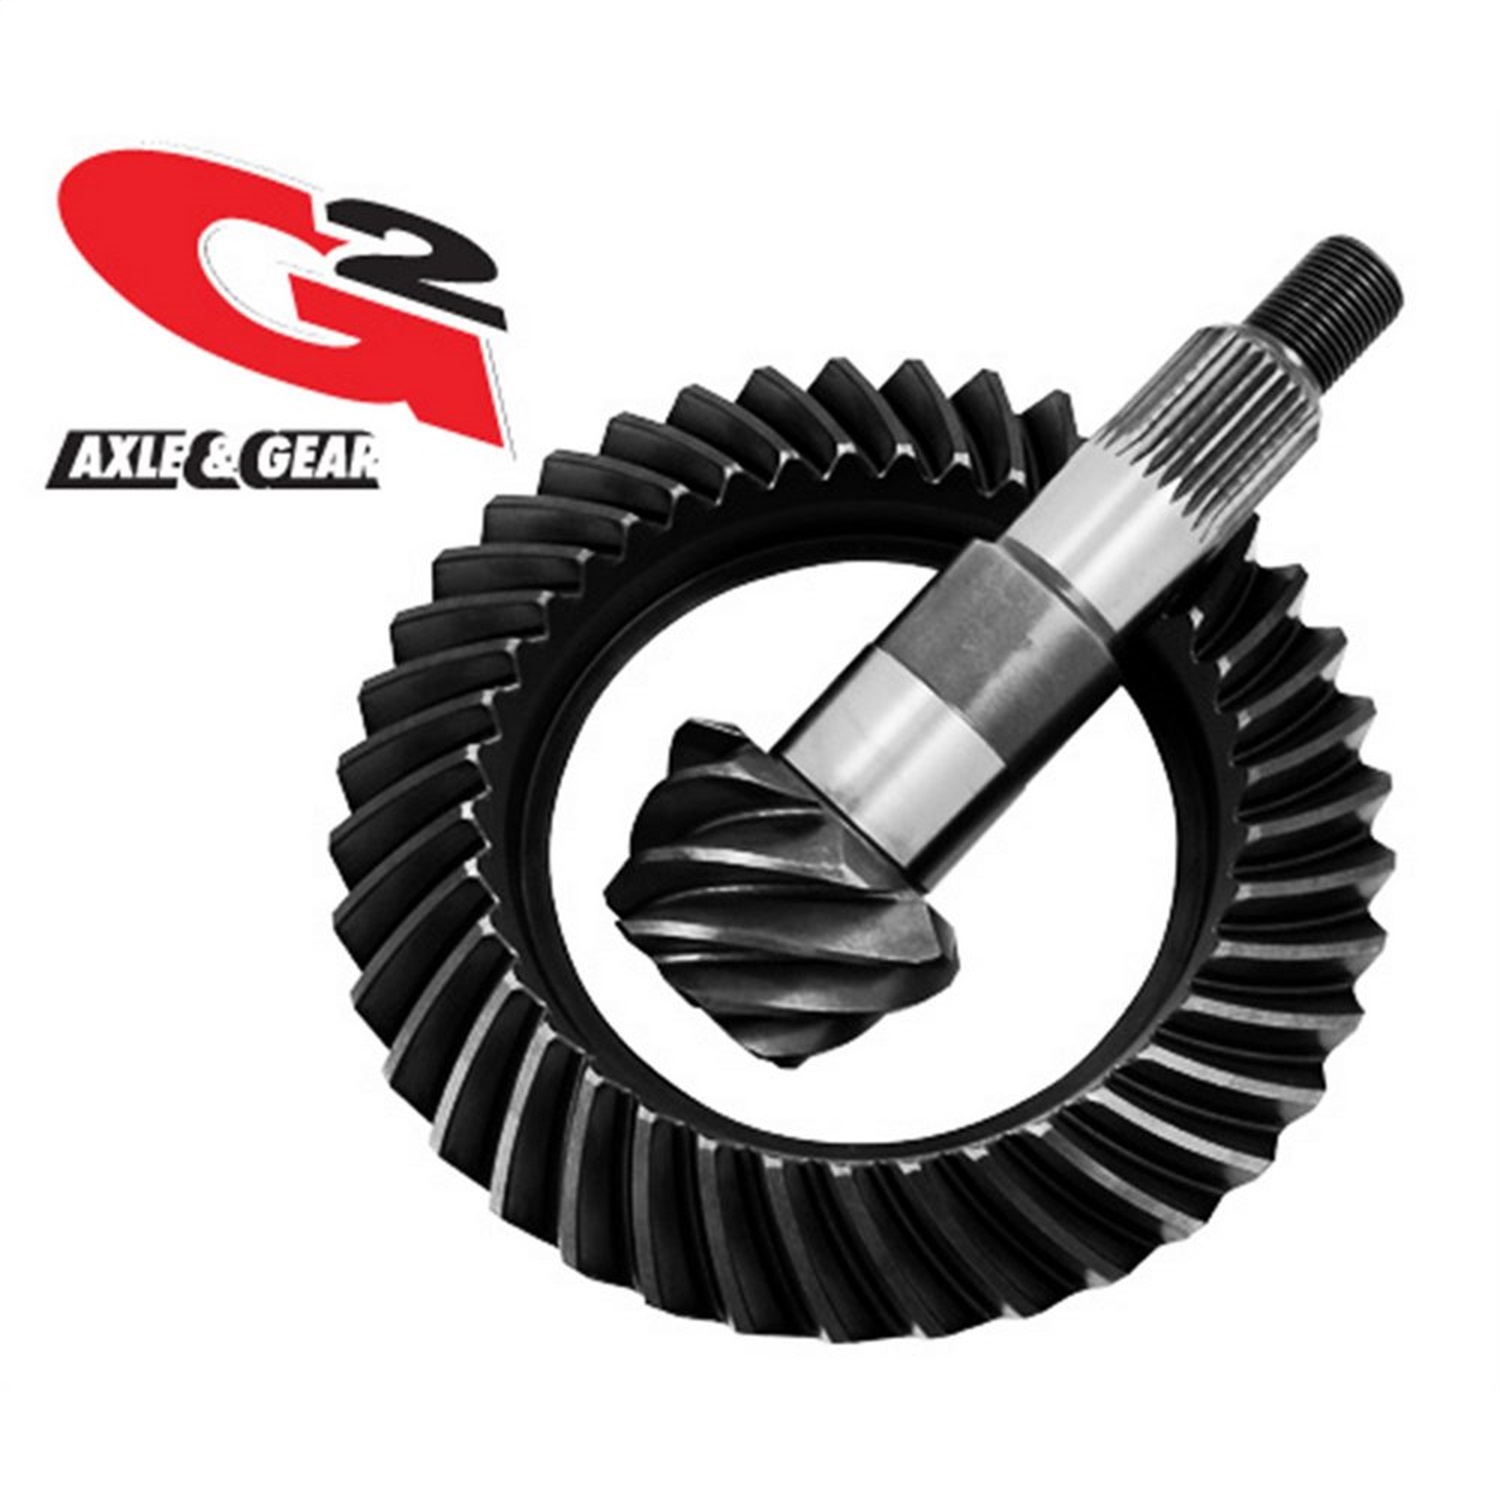 G2 Axle and Gear G2 Axle and Gear 2-2080-430 Ring and Pinion